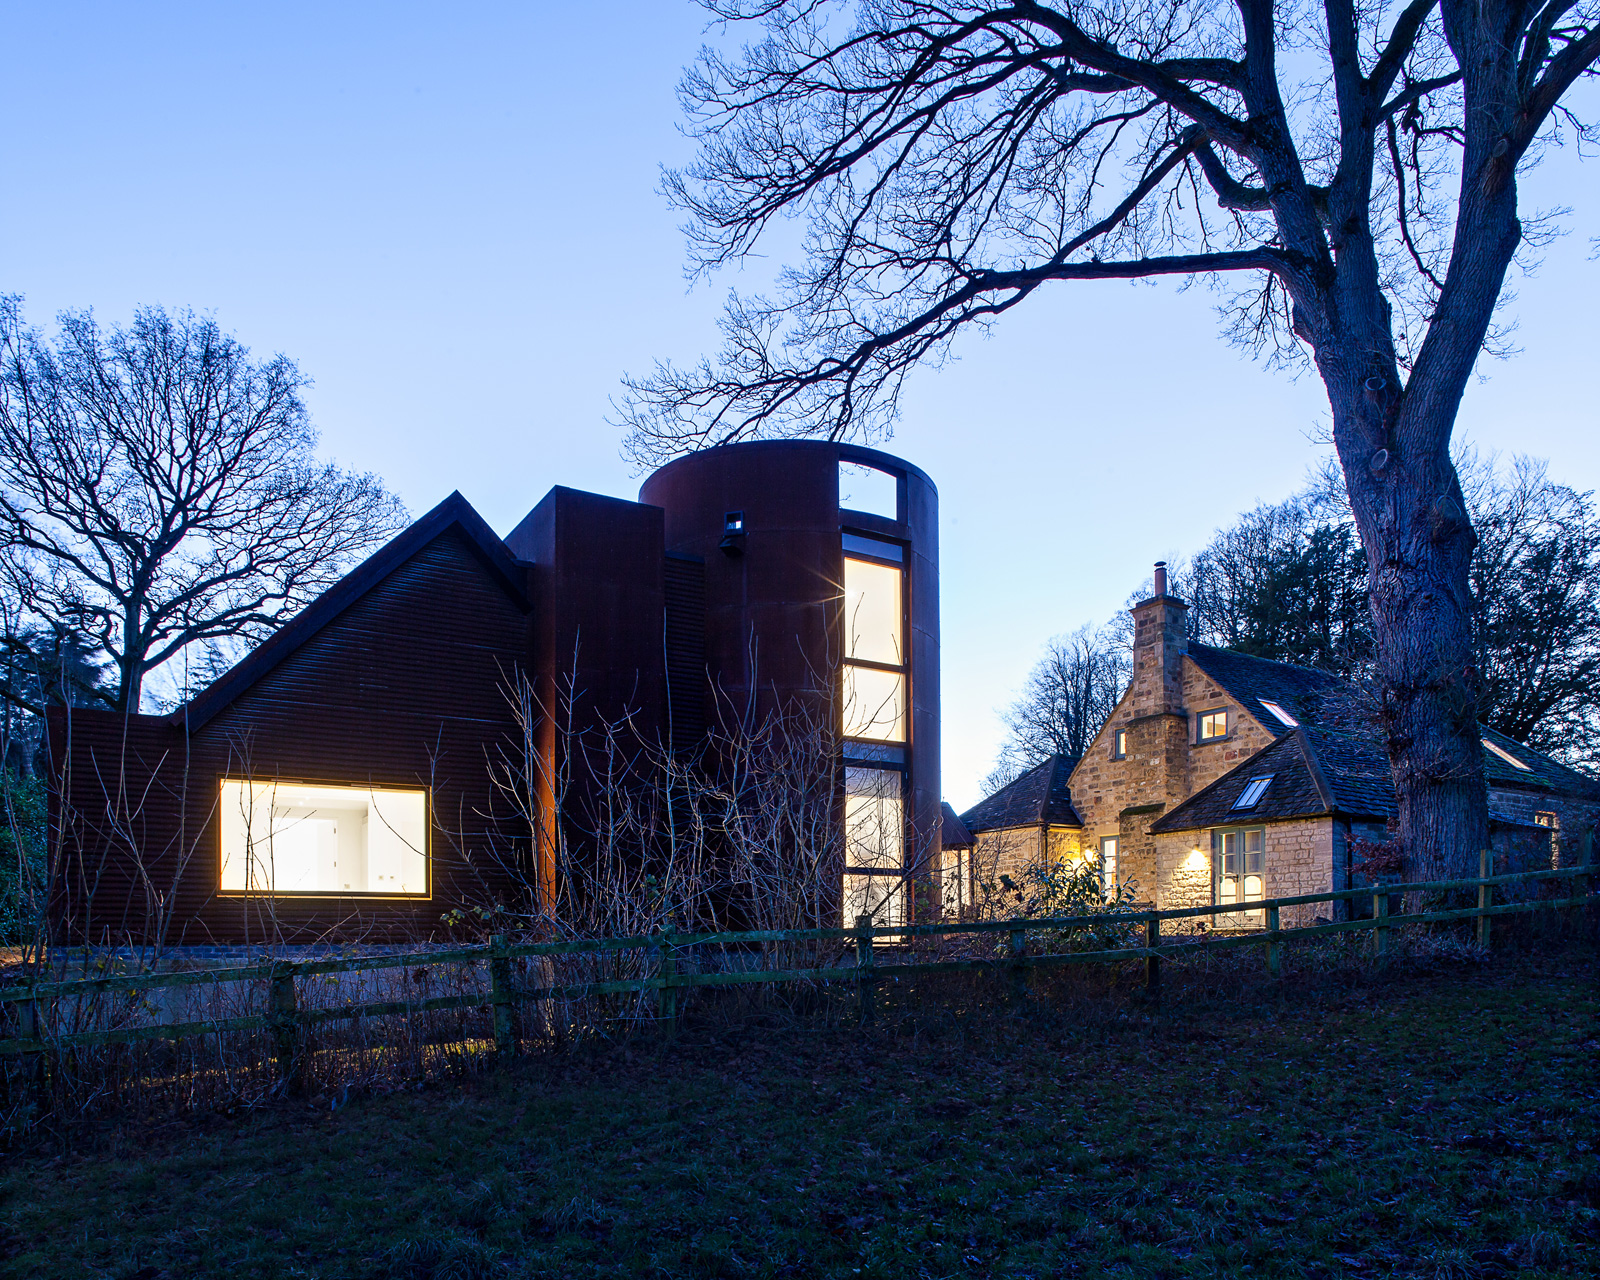 Gasworks Cottage by Chris Dyson Architects. Photography: Peter Landers